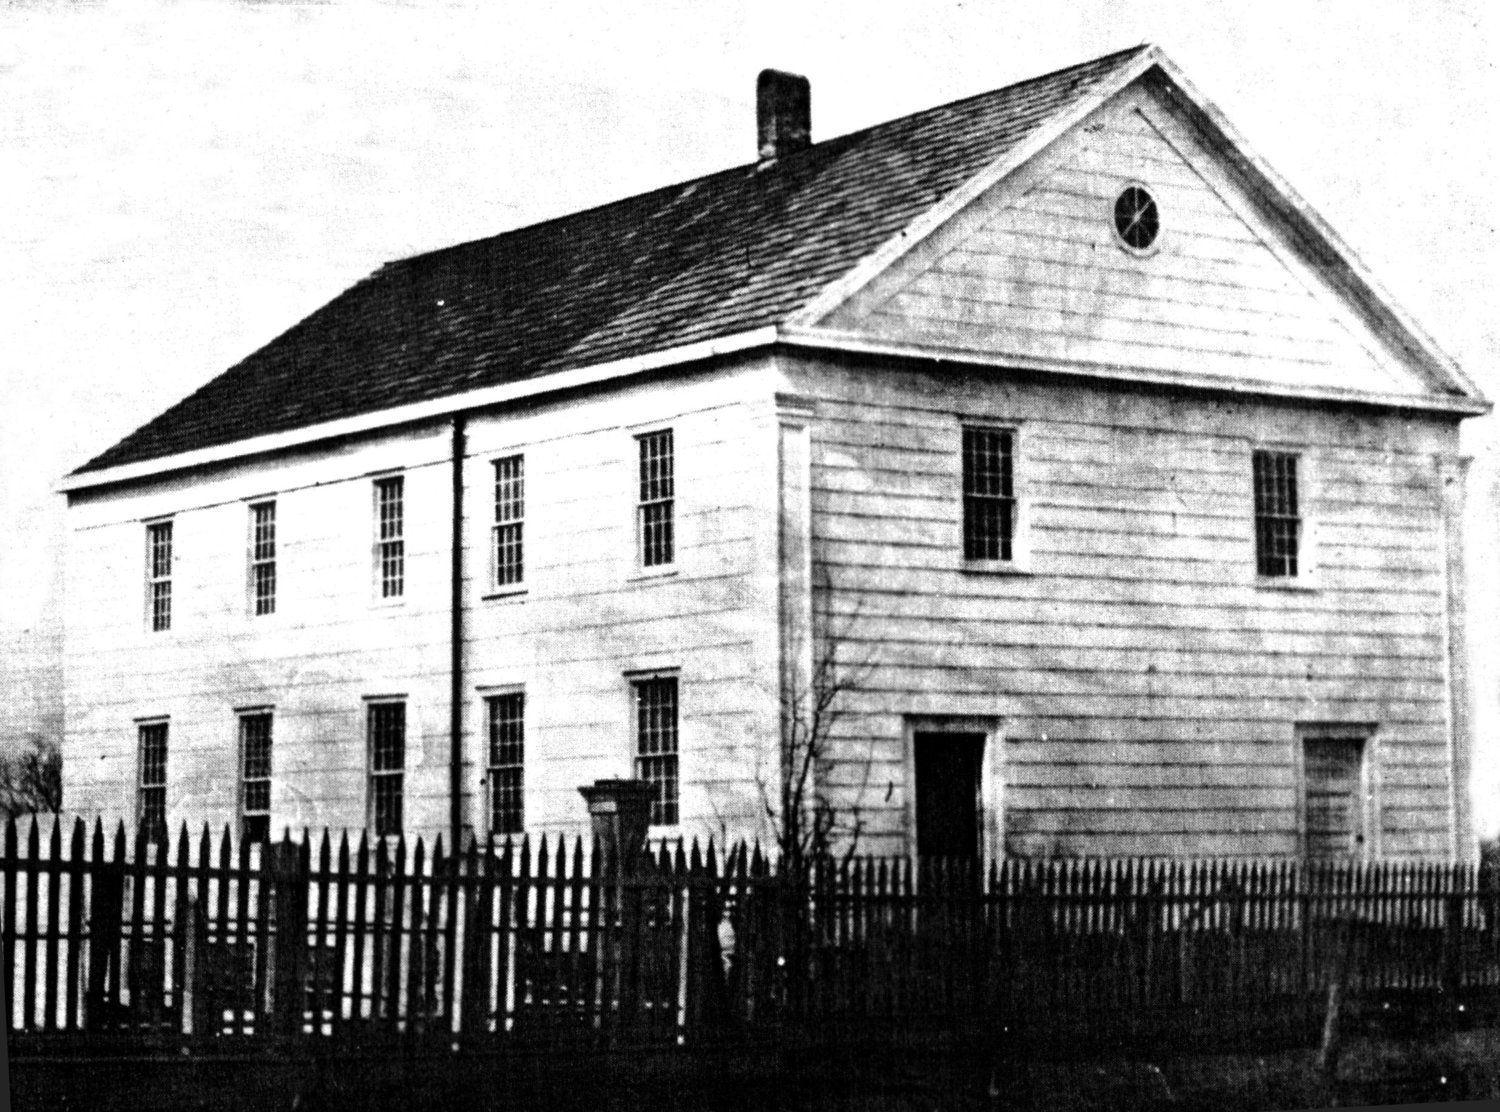 This is the first Old Sand Hole Church and cemetery, in the 1870s, looking much as it did in 1859, when poor Anthony Pearsall was buried there. This church building was moved away and used as a barn. Twice, the replacement church buildings burned to the ground. The now “church-less” cemetery is known as the Rockville Cemetery.